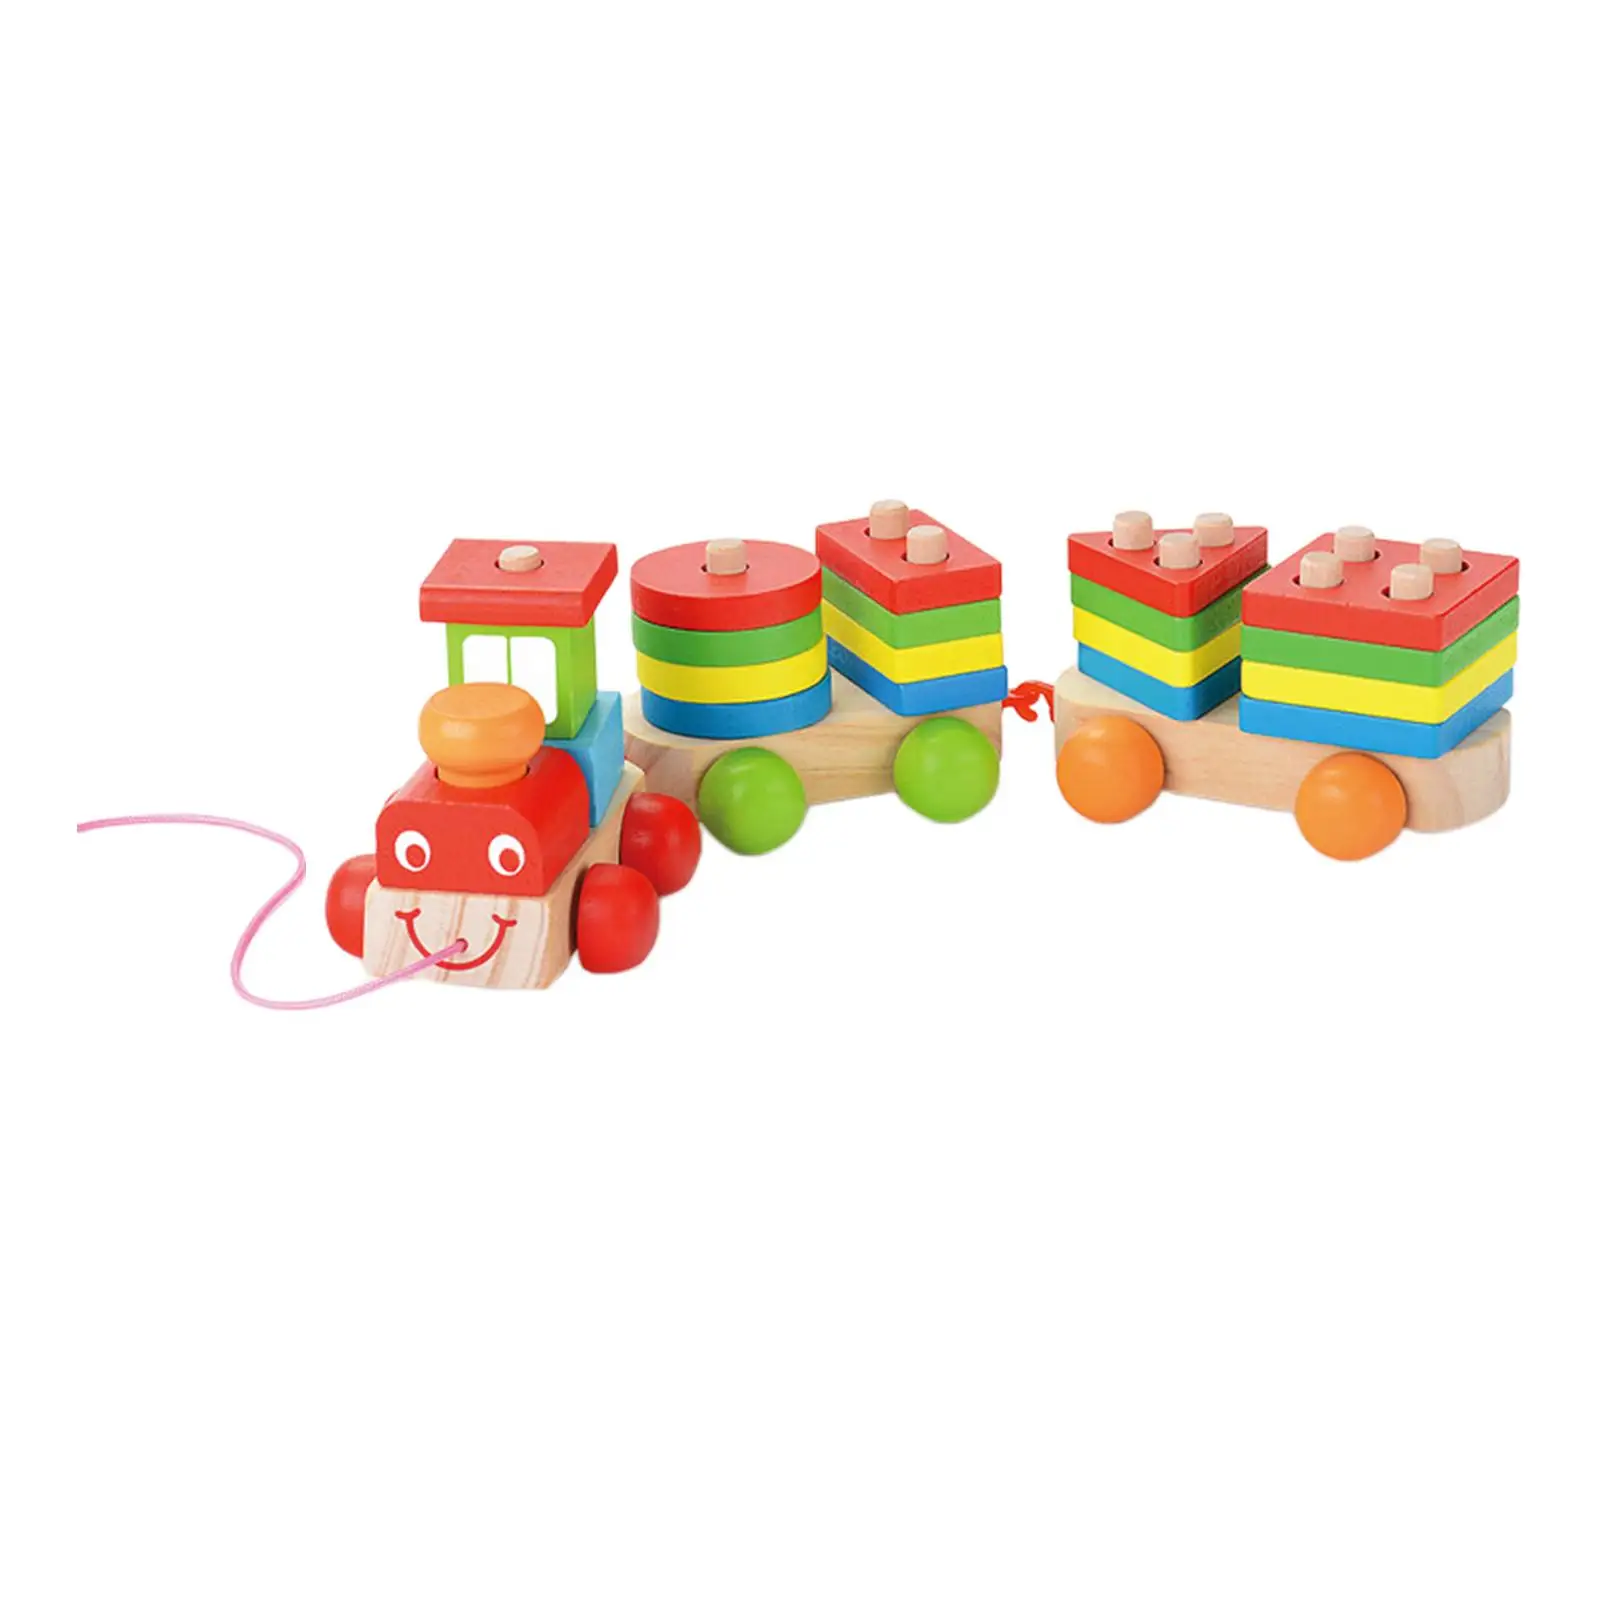 Color Shape Sorting Toys Developmental Toy Shape Color Recognition Blocks for Preschool Children Kids Toddlers Holiday Gifts